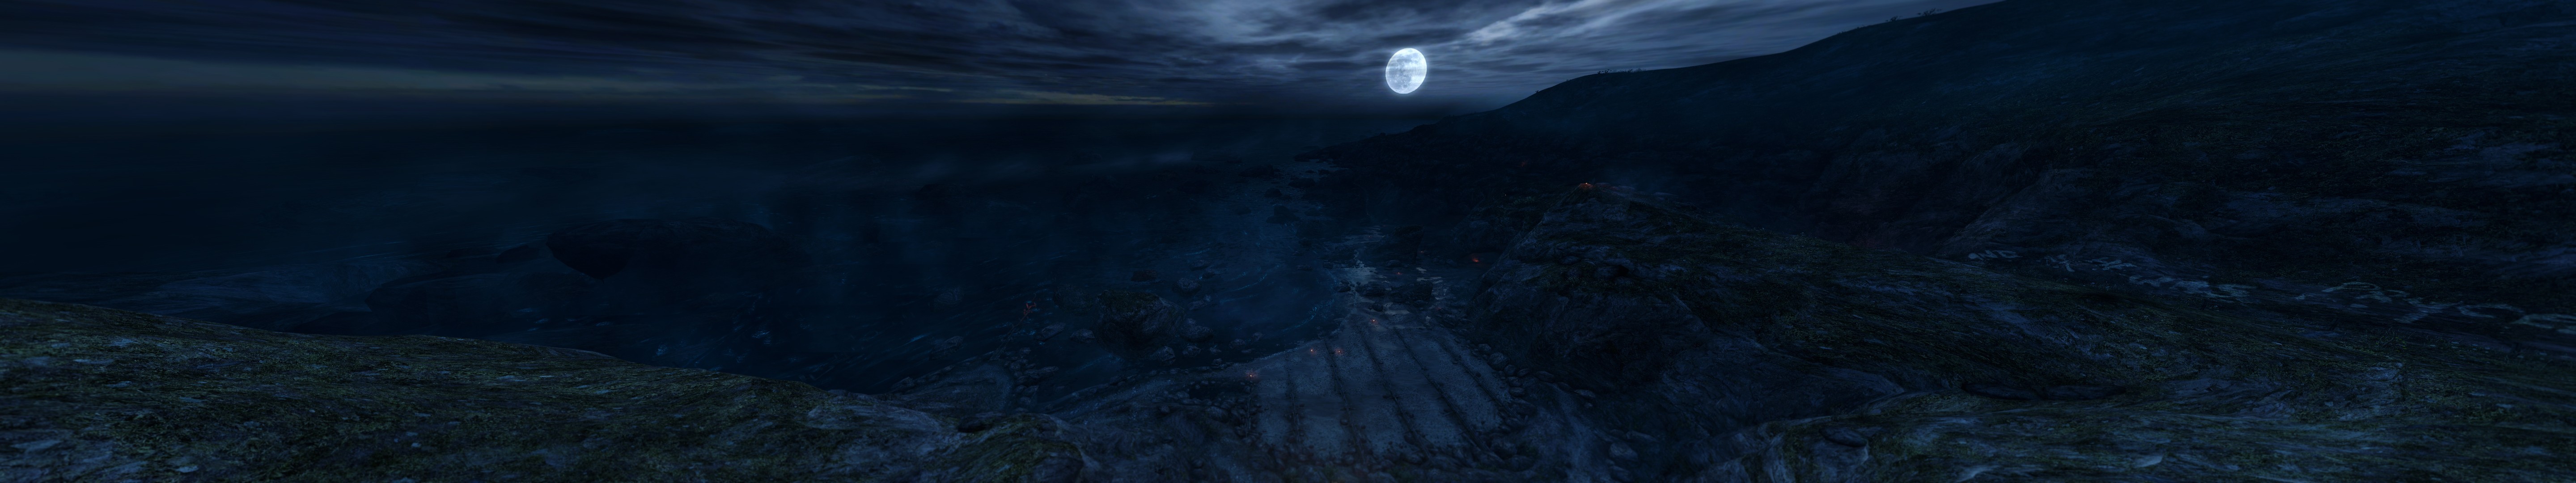 Multiple Display Video Games Dear Esther 5760x1080